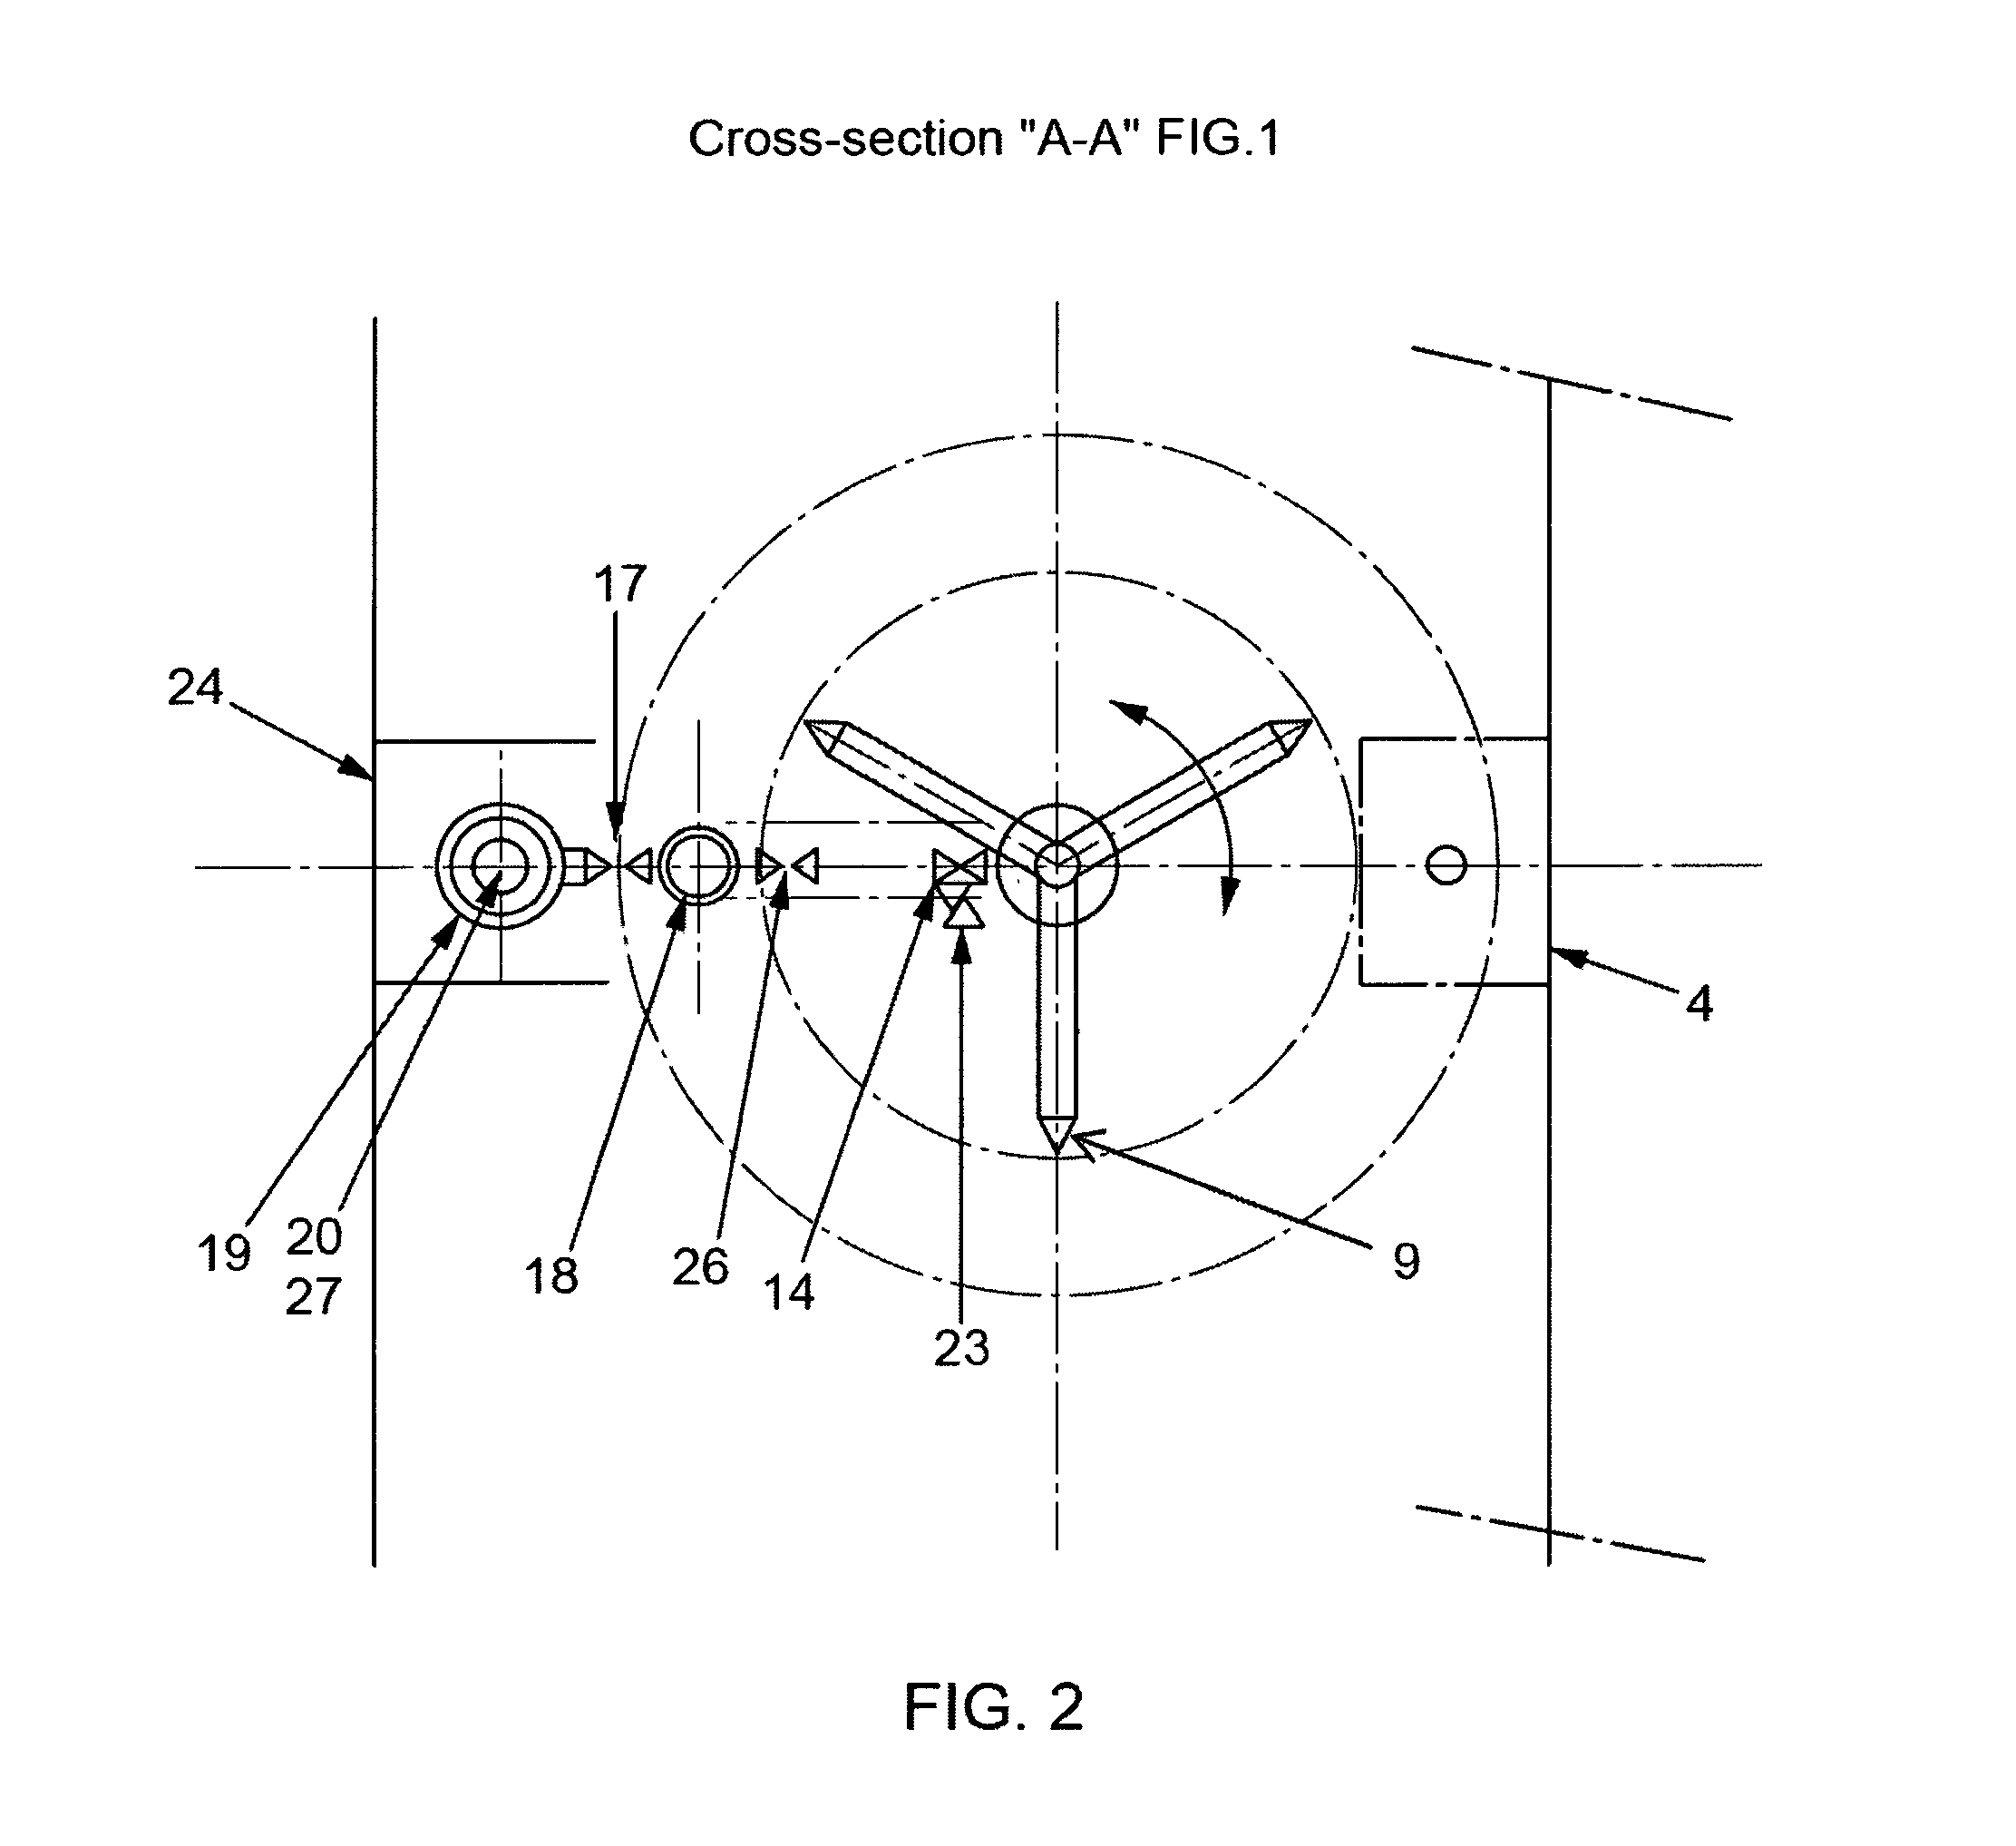 Soup preparing and dispensing machine (SPDM) and method of producing individual servings of hot or cold soup using the same